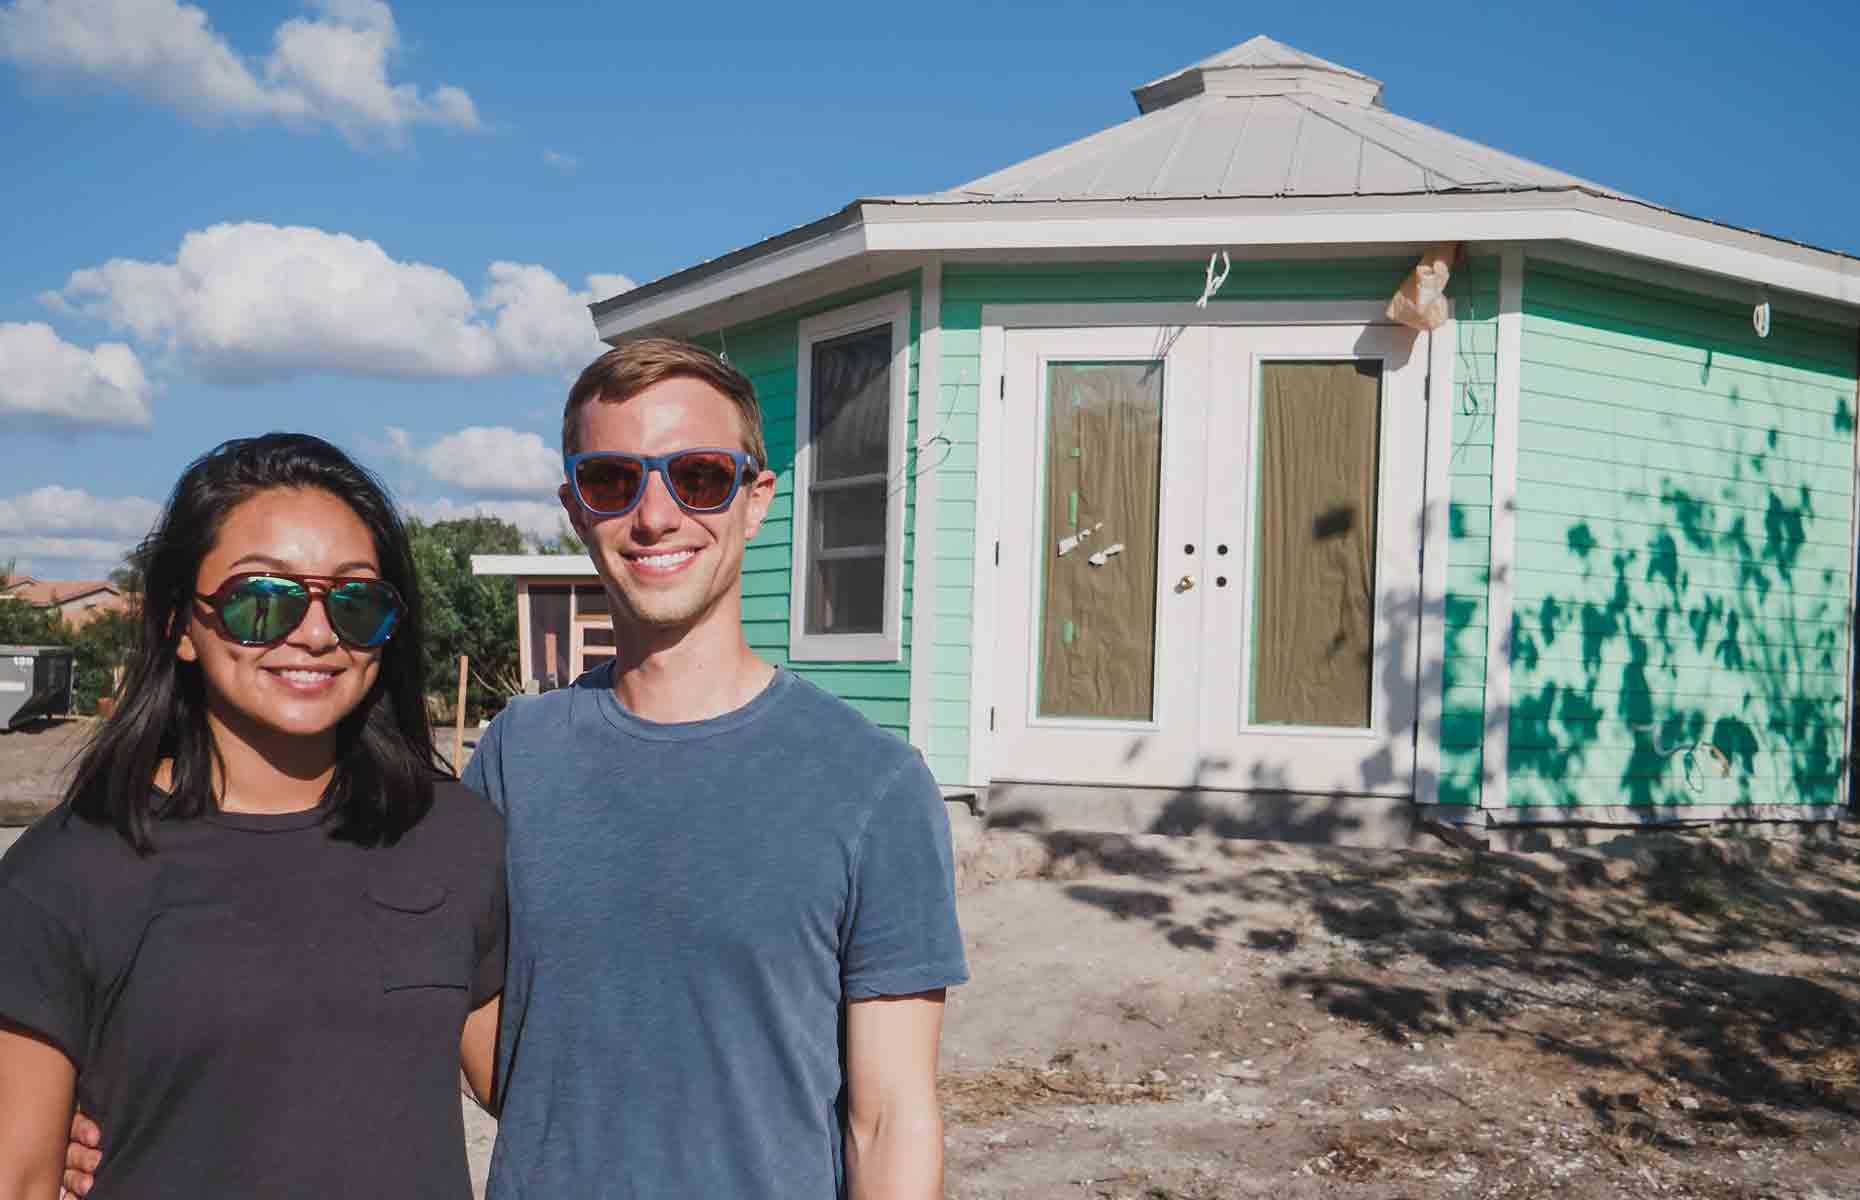 <p>With the financial and emotional freedom that tiny living offers, Tim and Sam can't see themselves trading in their island for a traditional home anytime soon. As for the future, they're mulling over the options.</p>  <p>They've already made the island available for short-term lets, and they're even considering adding a third tiny house. "Right now we’re enjoying it <span>–</span> it’s a cool experiment but it’s definitely not going to stay stagnate”, Tim says.  You can follow Tim and Sam's journey on <a href="https://www.instagram.com/shellmateisland/">Instagram</a> and <a href="https://www.facebook.com/Shellmateisland/">Facebook</a>. </p>  <p><strong>Now take a look at <a href="https://www.loveexploring.com/news/223263/the-most-beautiful-and-remote-piece-of-wilderness-in-every-us-state">amazing pieces of wilderness across every US state</a></strong></p>